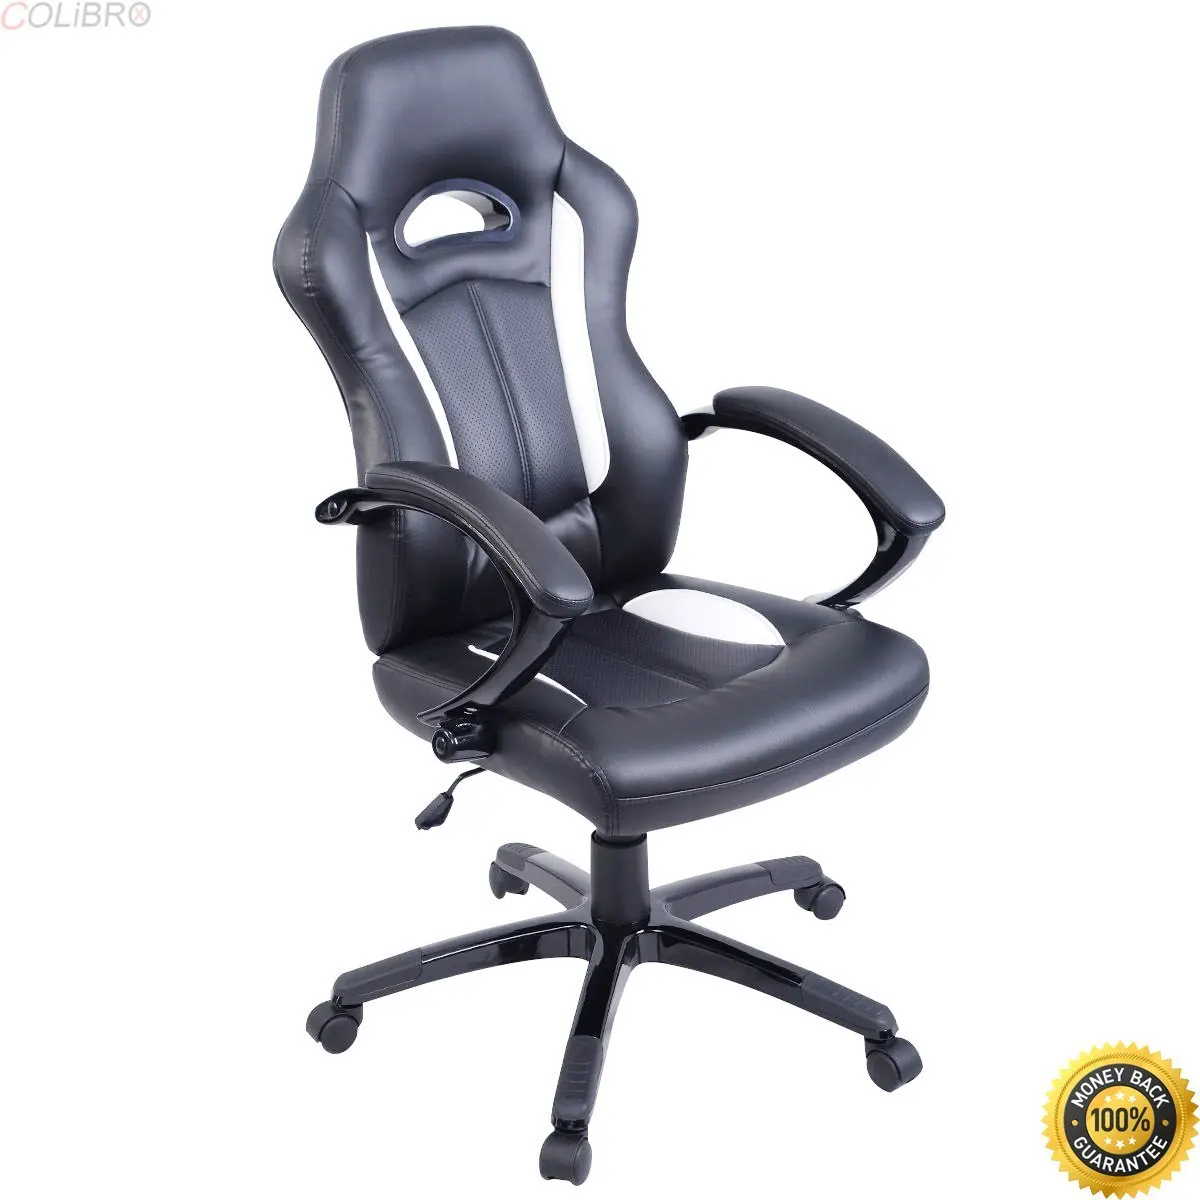 Cheap Tesco Gaming Chairs, find Tesco Gaming Chairs deals on line at